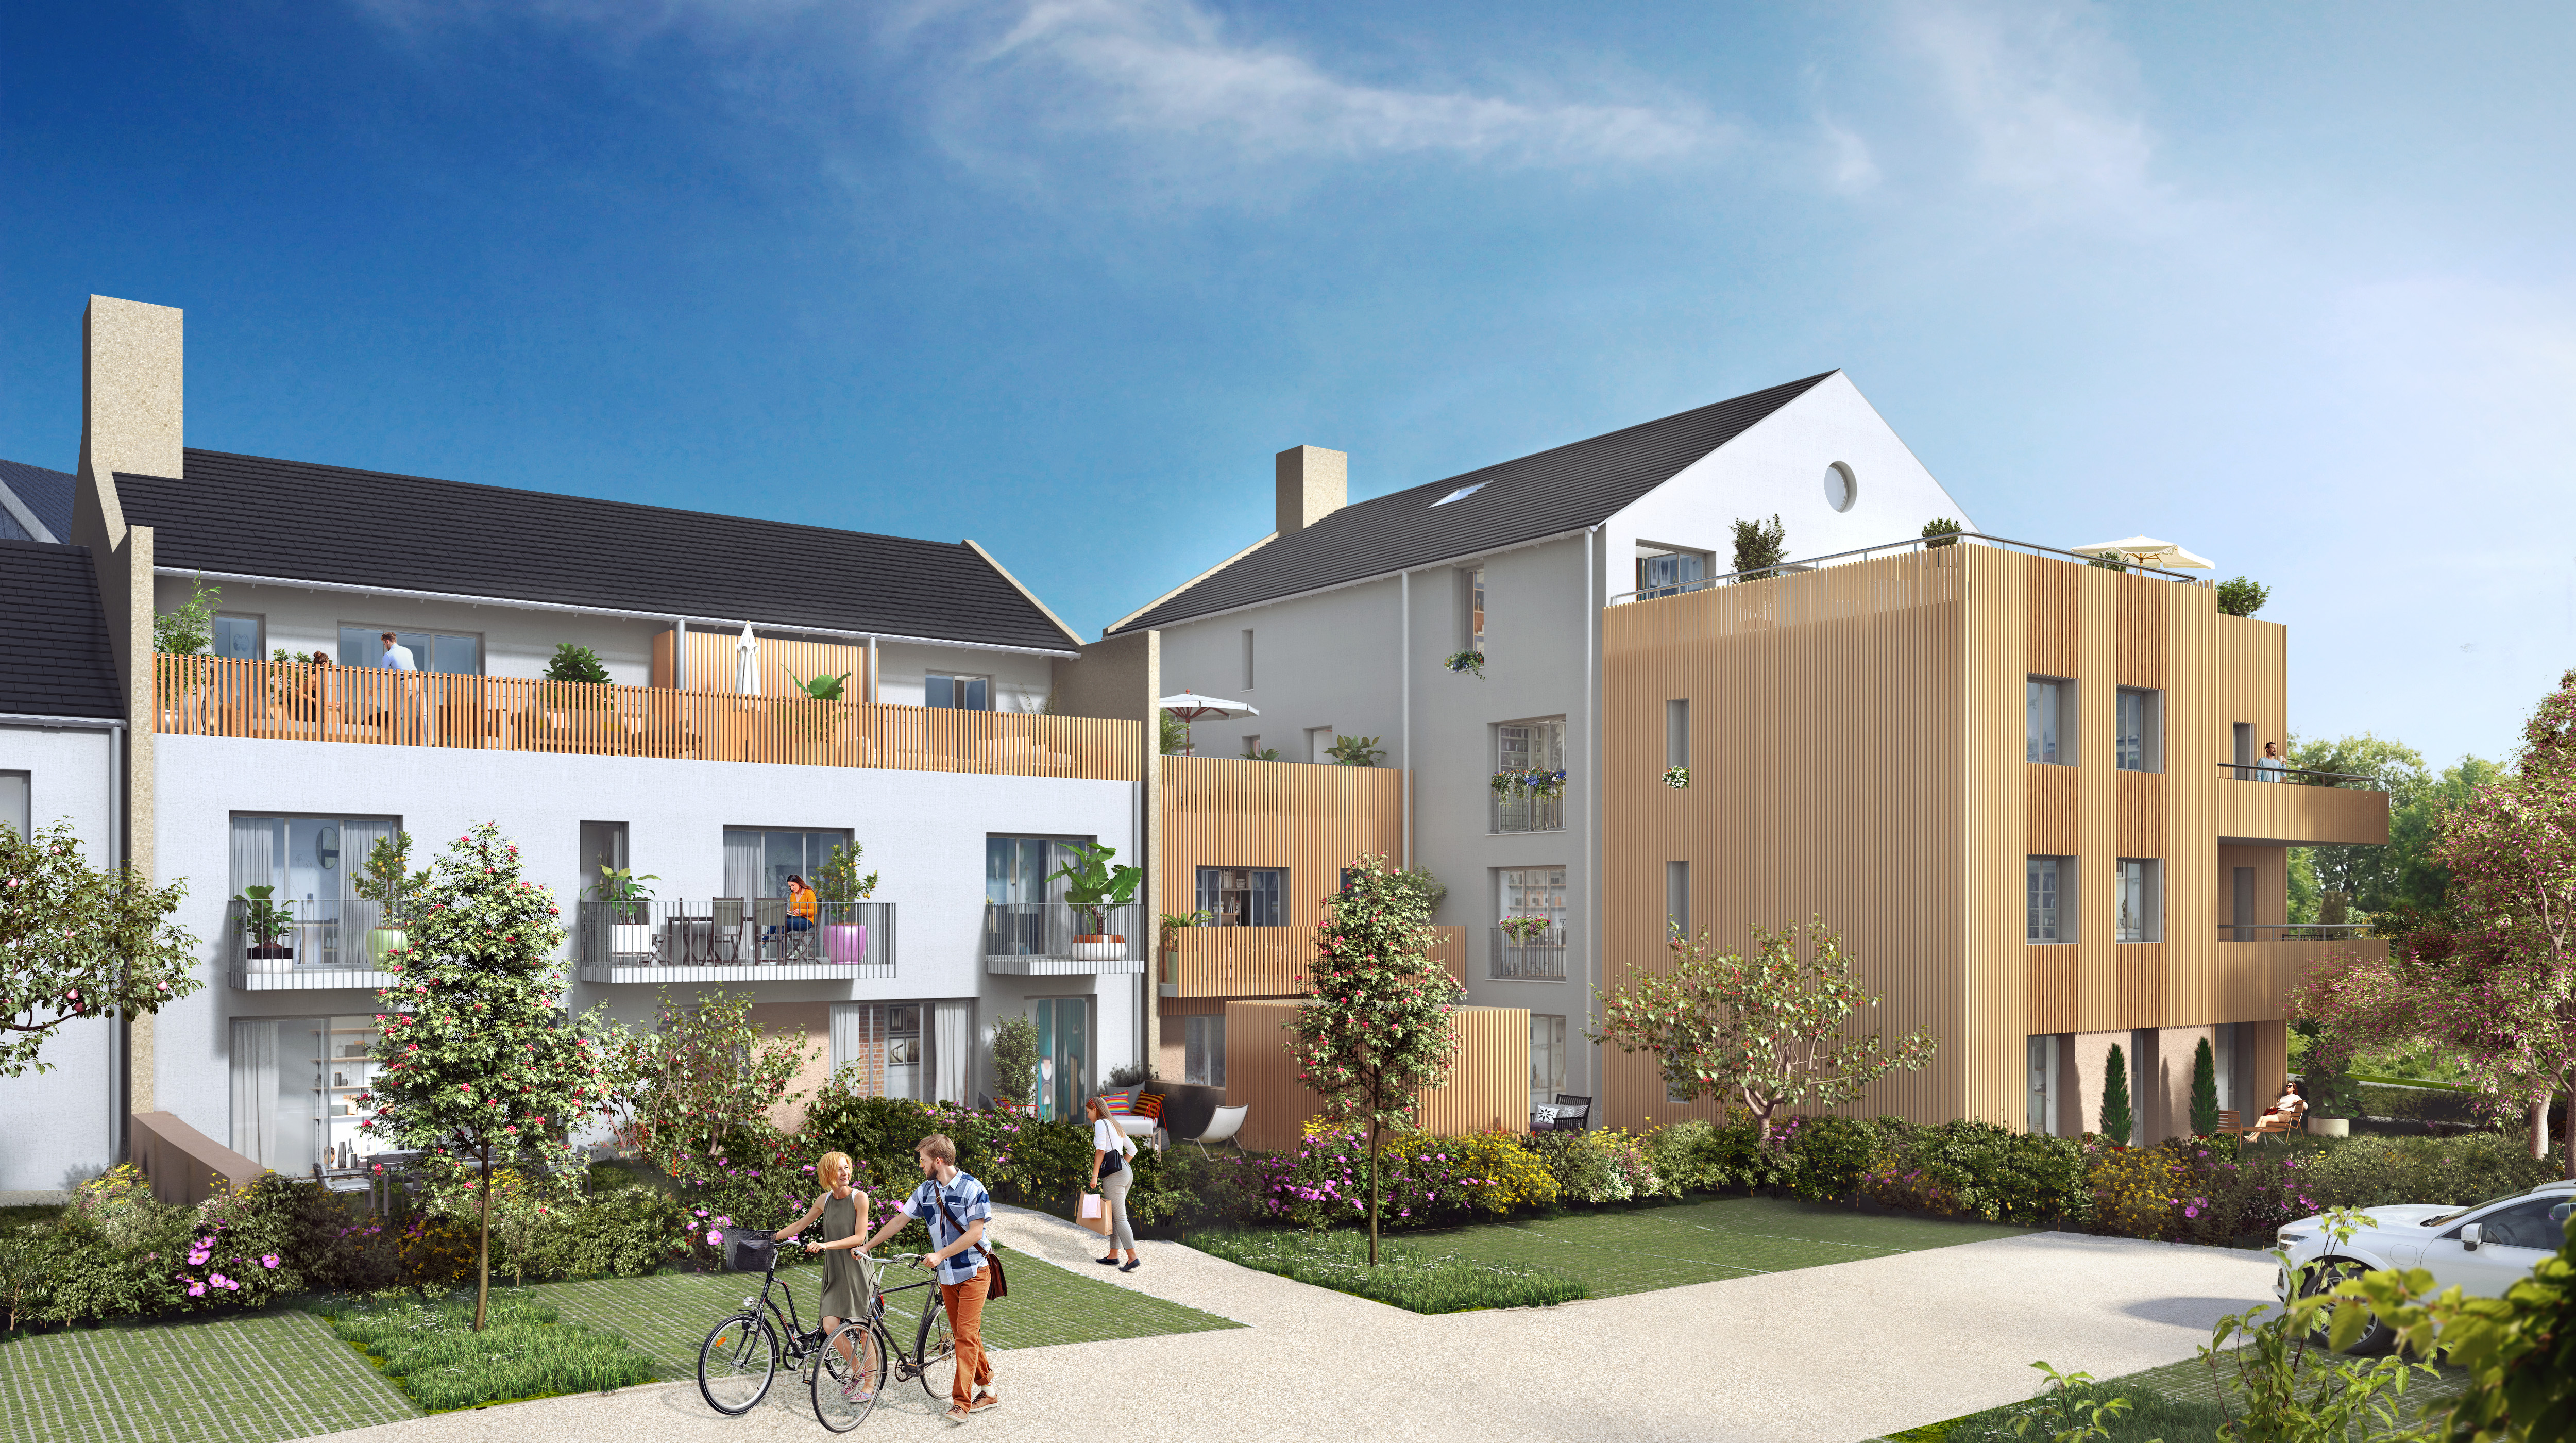 Programme Immobilier neuf ADELAIDE à Caen (14)